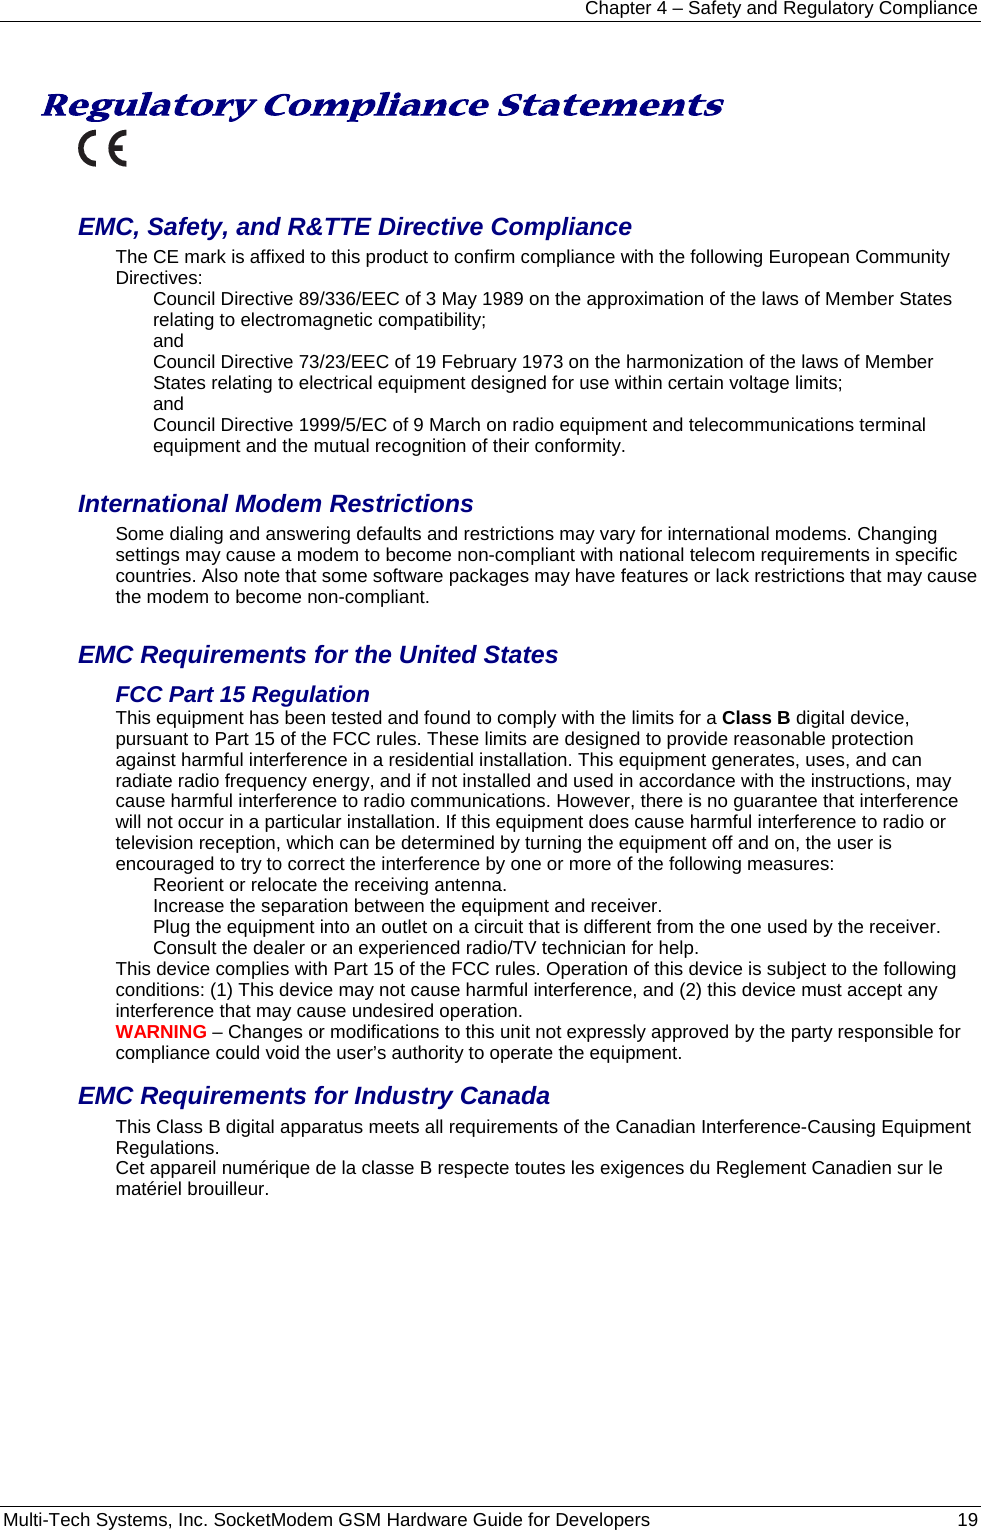 Chapter 4 – Safety and Regulatory Compliance Multi-Tech Systems, Inc. SocketModem GSM Hardware Guide for Developers   19   Regulatory Compliance Statements   EMC, Safety, and R&amp;TTE Directive Compliance The CE mark is affixed to this product to confirm compliance with the following European Community Directives: Council Directive 89/336/EEC of 3 May 1989 on the approximation of the laws of Member States relating to electromagnetic compatibility;  and Council Directive 73/23/EEC of 19 February 1973 on the harmonization of the laws of Member States relating to electrical equipment designed for use within certain voltage limits; and Council Directive 1999/5/EC of 9 March on radio equipment and telecommunications terminal equipment and the mutual recognition of their conformity.   International Modem Restrictions Some dialing and answering defaults and restrictions may vary for international modems. Changing settings may cause a modem to become non-compliant with national telecom requirements in specific countries. Also note that some software packages may have features or lack restrictions that may cause the modem to become non-compliant.  EMC Requirements for the United States FCC Part 15 Regulation This equipment has been tested and found to comply with the limits for a Class B digital device, pursuant to Part 15 of the FCC rules. These limits are designed to provide reasonable protection against harmful interference in a residential installation. This equipment generates, uses, and can radiate radio frequency energy, and if not installed and used in accordance with the instructions, may cause harmful interference to radio communications. However, there is no guarantee that interference will not occur in a particular installation. If this equipment does cause harmful interference to radio or television reception, which can be determined by turning the equipment off and on, the user is encouraged to try to correct the interference by one or more of the following measures: Reorient or relocate the receiving antenna. Increase the separation between the equipment and receiver. Plug the equipment into an outlet on a circuit that is different from the one used by the receiver. Consult the dealer or an experienced radio/TV technician for help. This device complies with Part 15 of the FCC rules. Operation of this device is subject to the following conditions: (1) This device may not cause harmful interference, and (2) this device must accept any interference that may cause undesired operation. WARNING – Changes or modifications to this unit not expressly approved by the party responsible for compliance could void the user’s authority to operate the equipment. EMC Requirements for Industry Canada This Class B digital apparatus meets all requirements of the Canadian Interference-Causing Equipment Regulations. Cet appareil numérique de la classe B respecte toutes les exigences du Reglement Canadien sur le matériel brouilleur. 